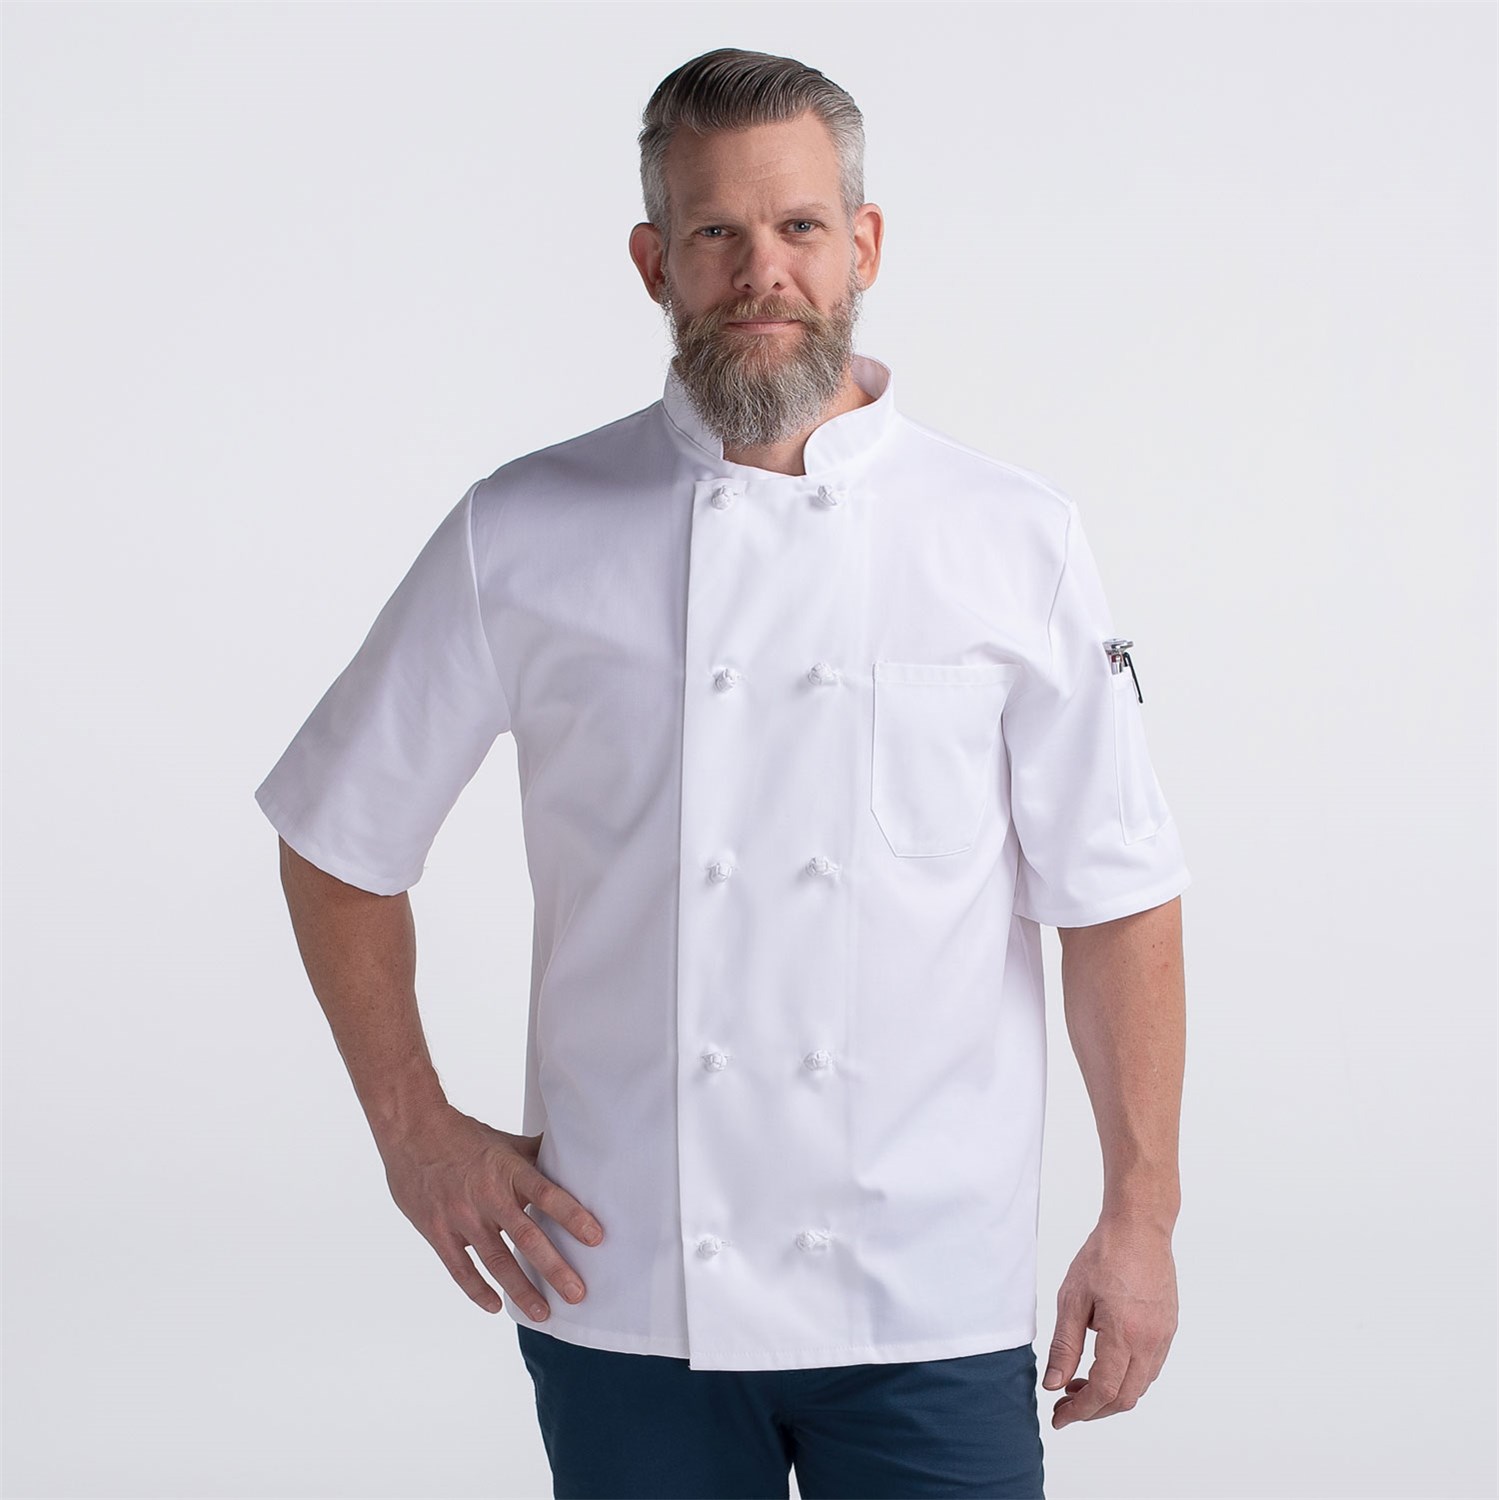 S-3X, 2 Colors Mens Asymmetrical 3//4 Rolled Up Sleeves Chef Coat